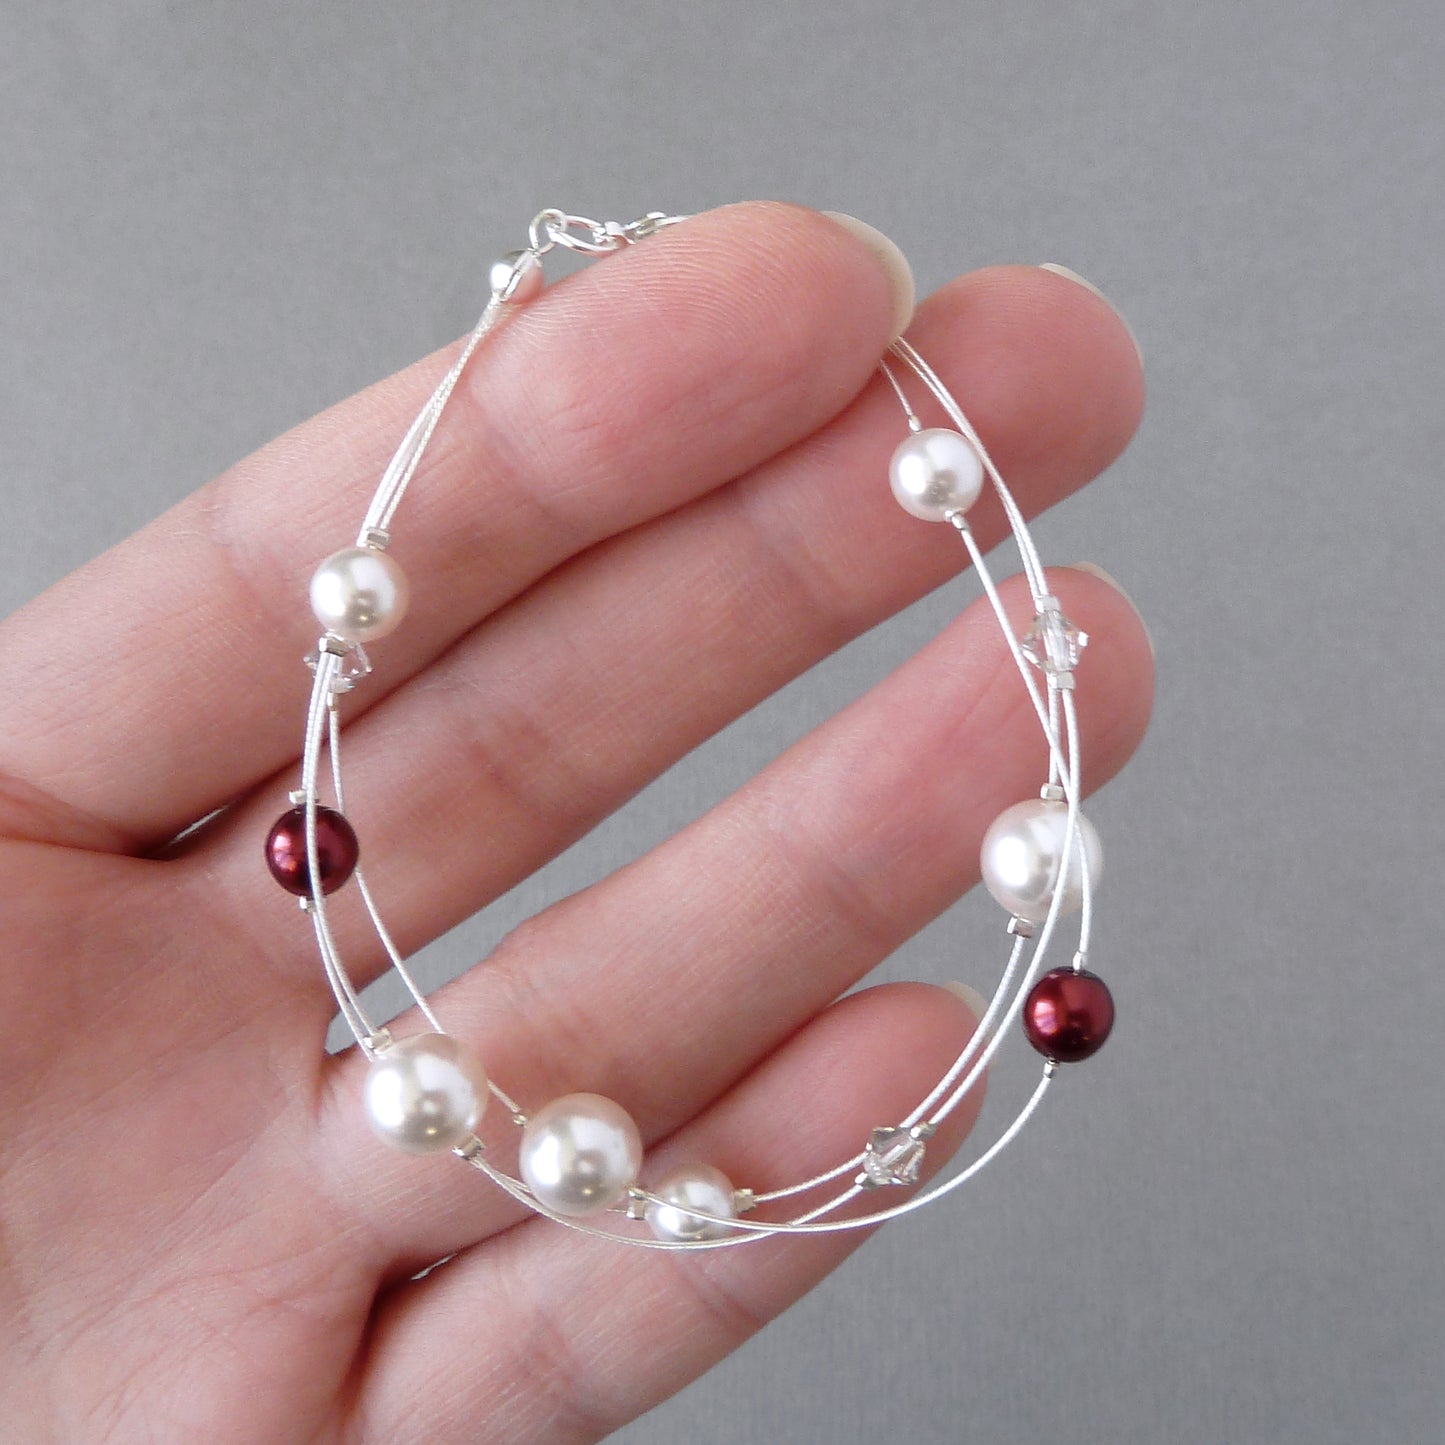 White and burgundy pearl bridesmaids bracelets